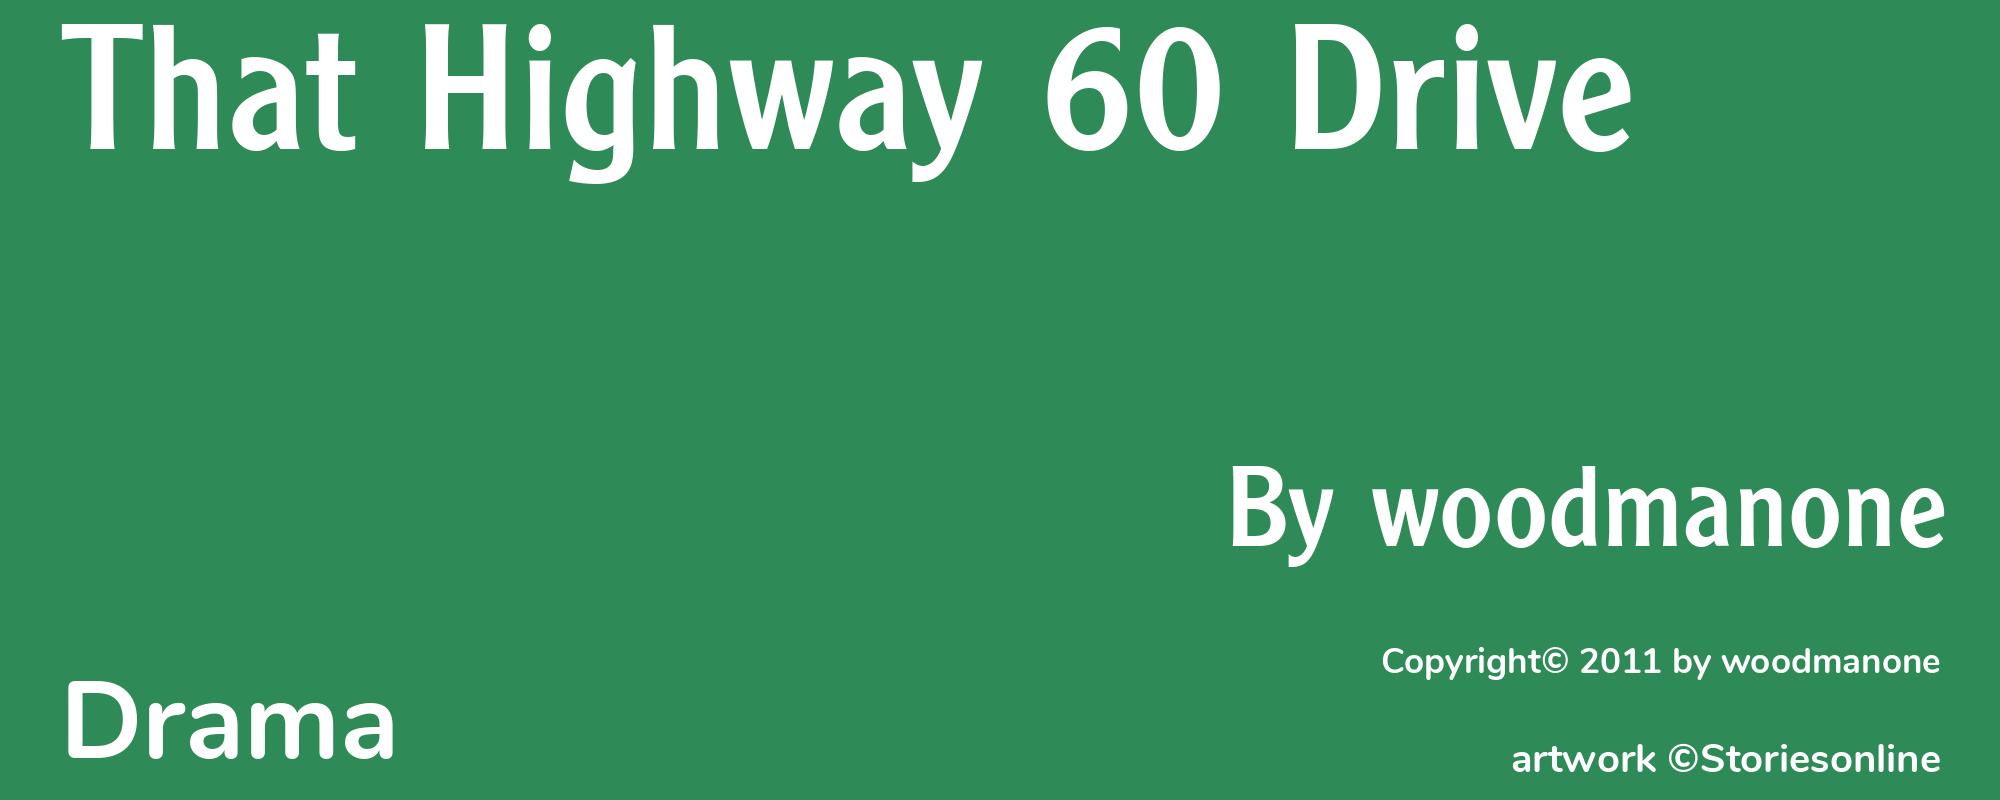 That Highway 60 Drive - Cover